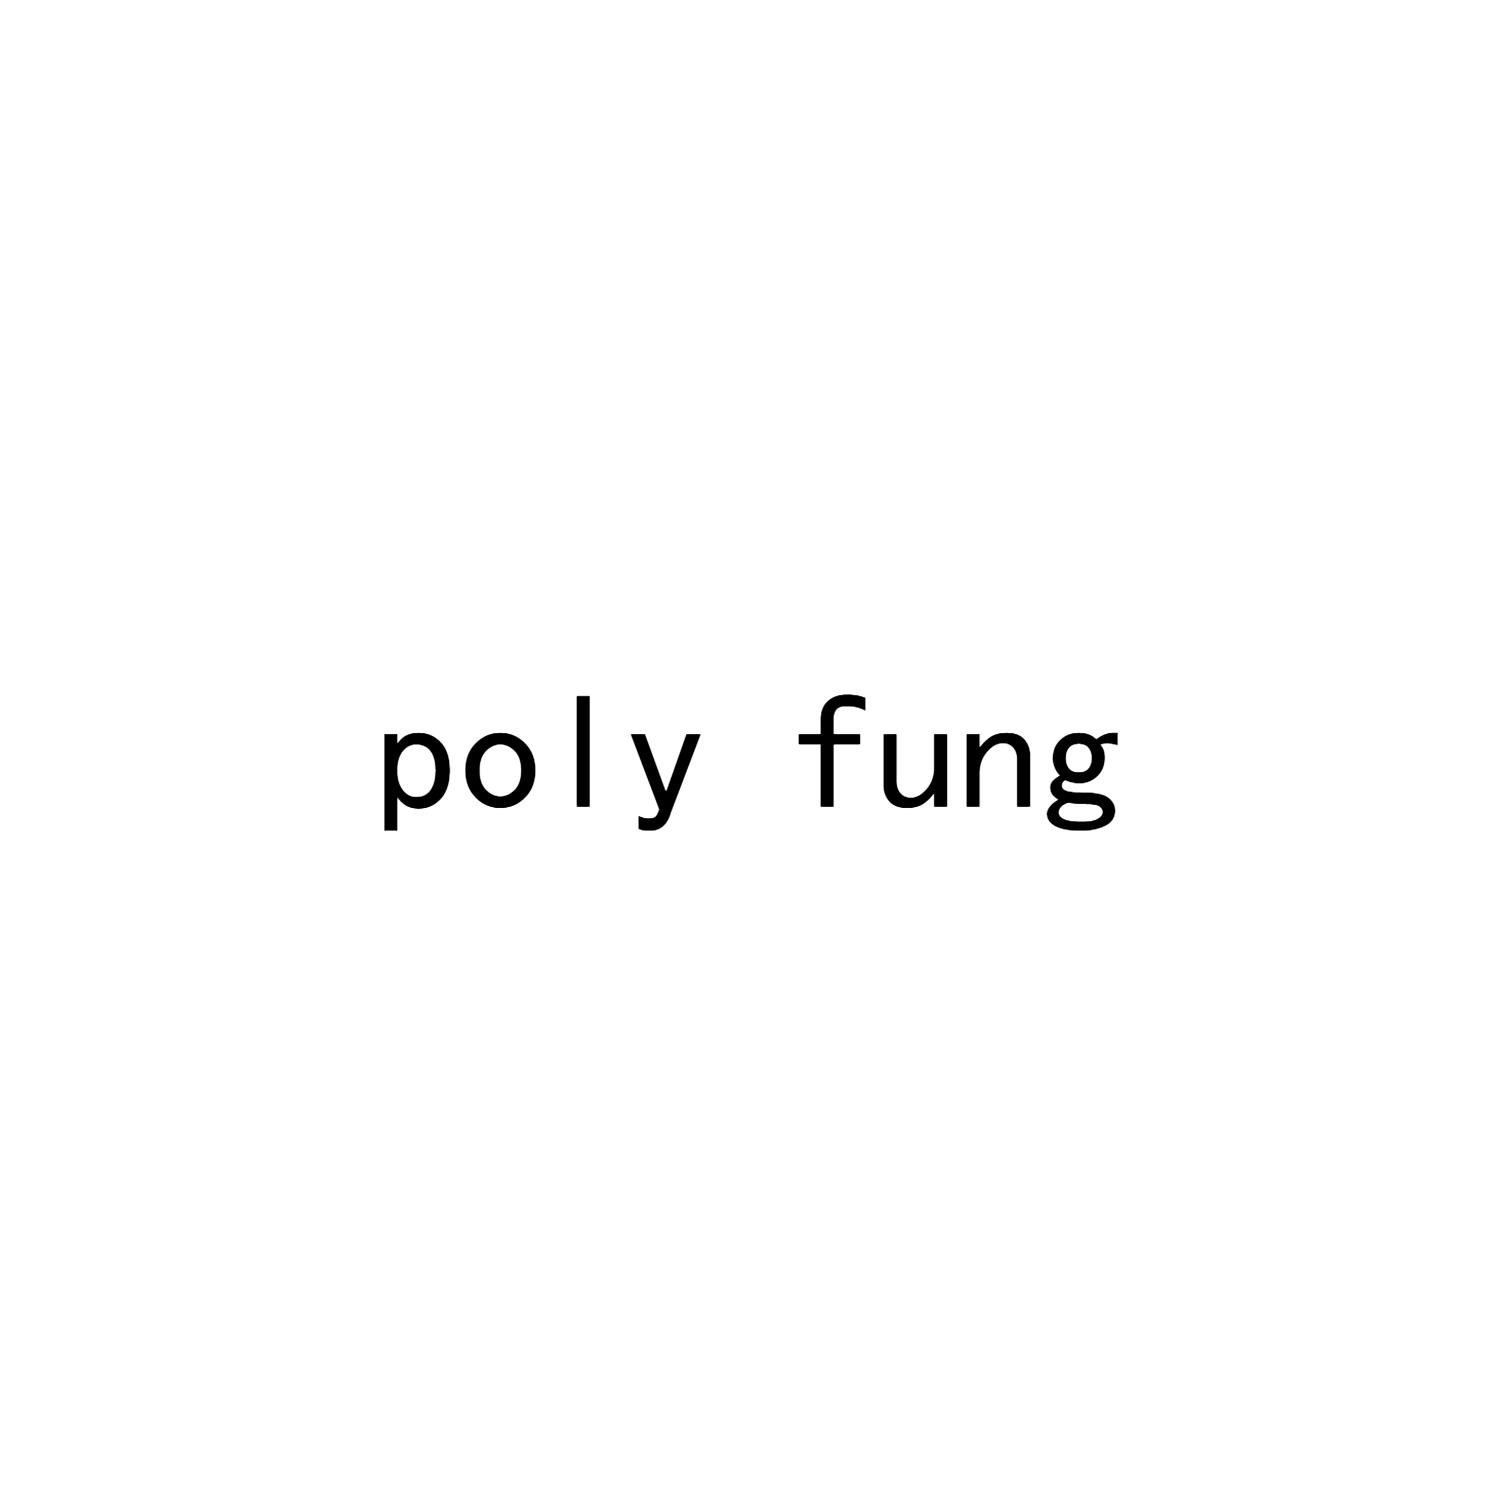 POLY FUNG